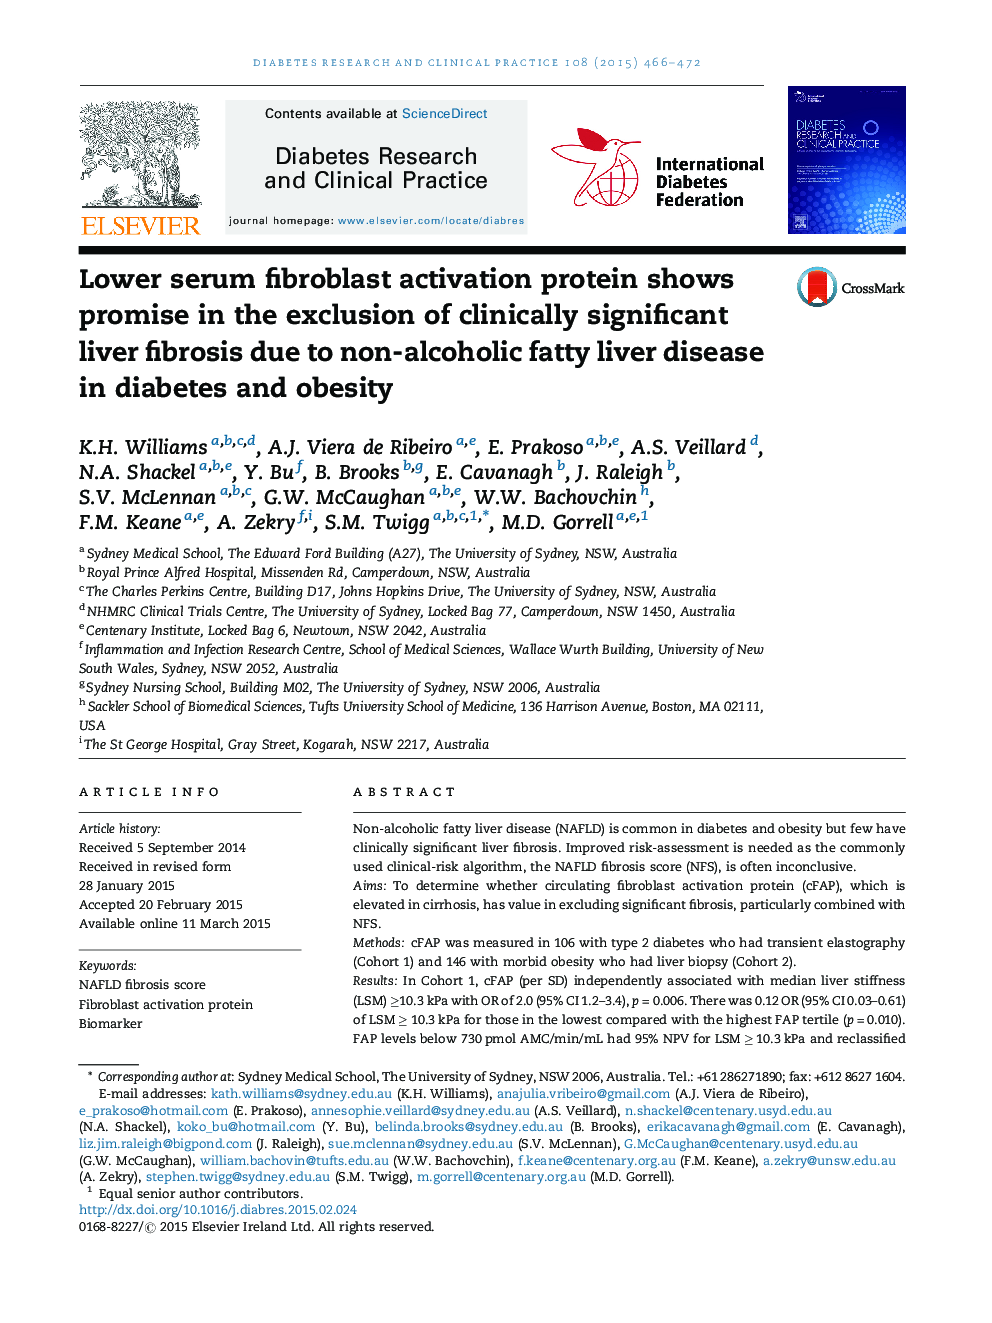 Lower serum fibroblast activation protein shows promise in the exclusion of clinically significant liver fibrosis due to non-alcoholic fatty liver disease in diabetes and obesity